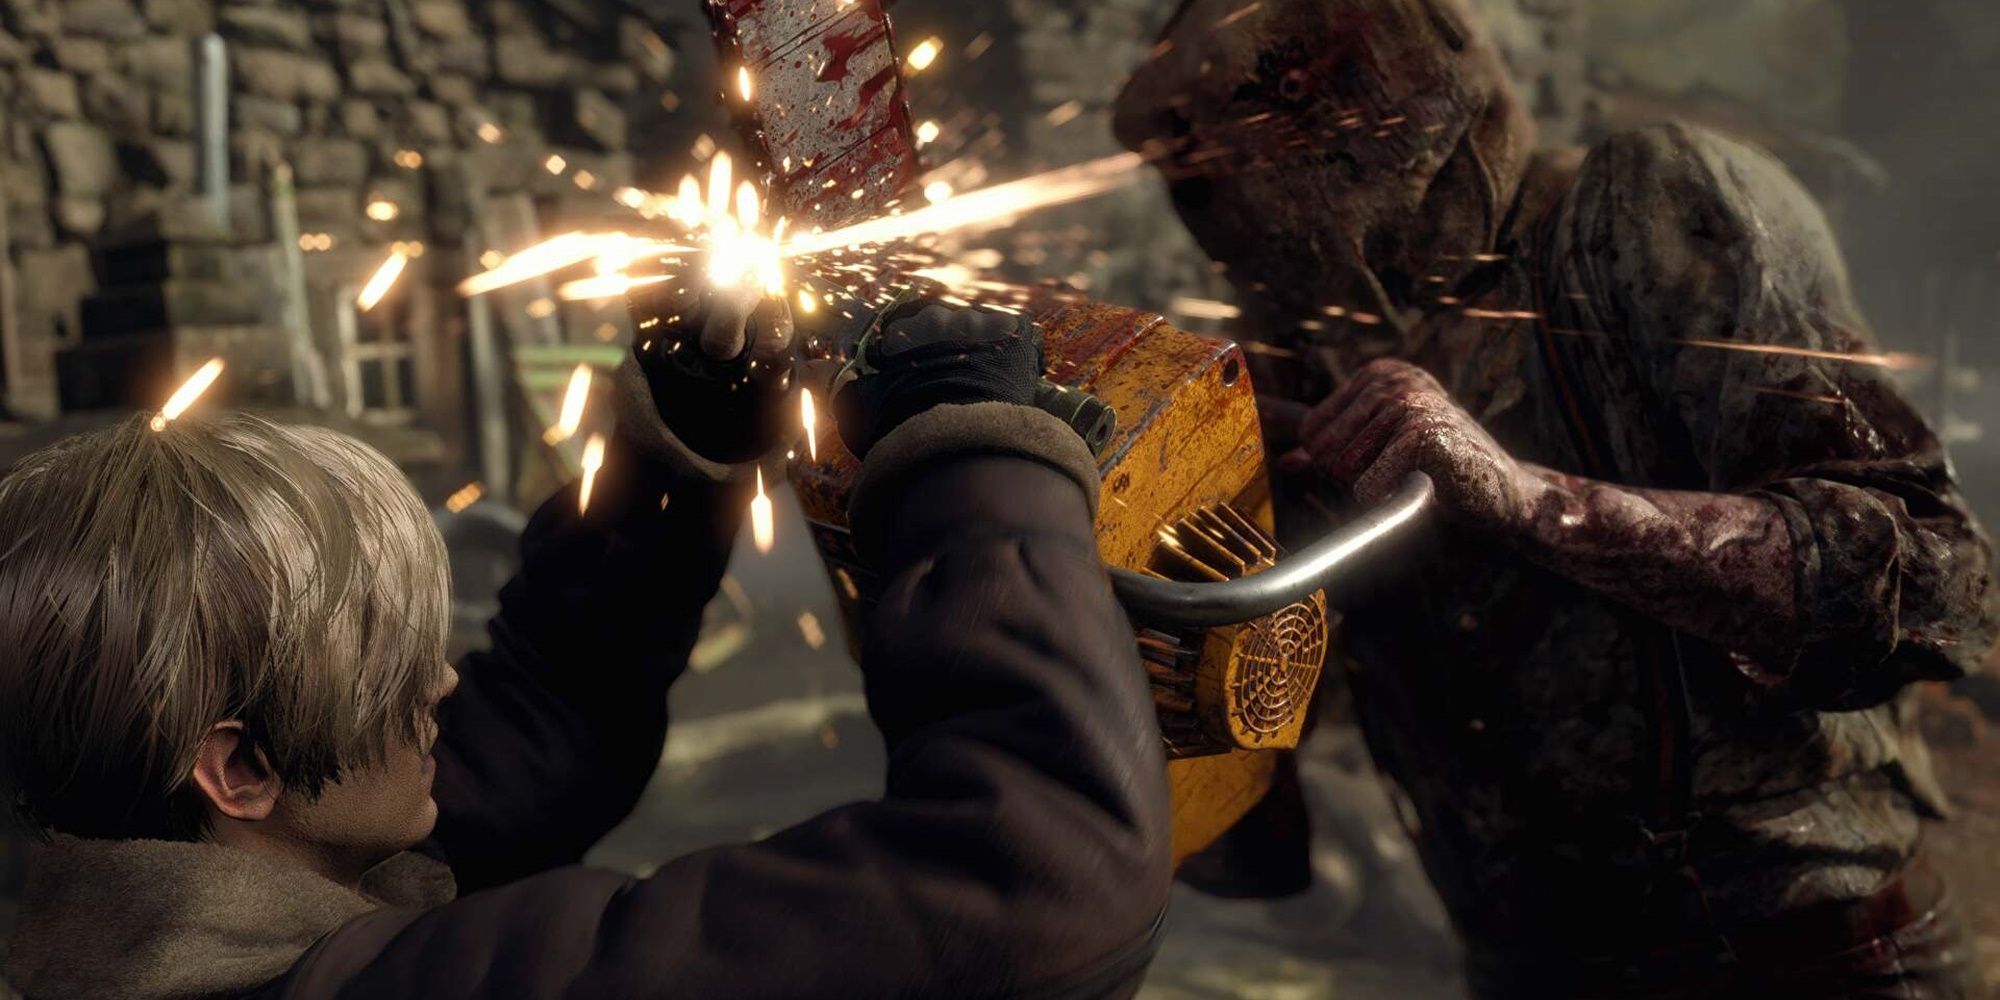 Resident Evil 4 Fans Discover How To Survive Dr. Salvador’s Chainsaw 17 Years After Game’s Release